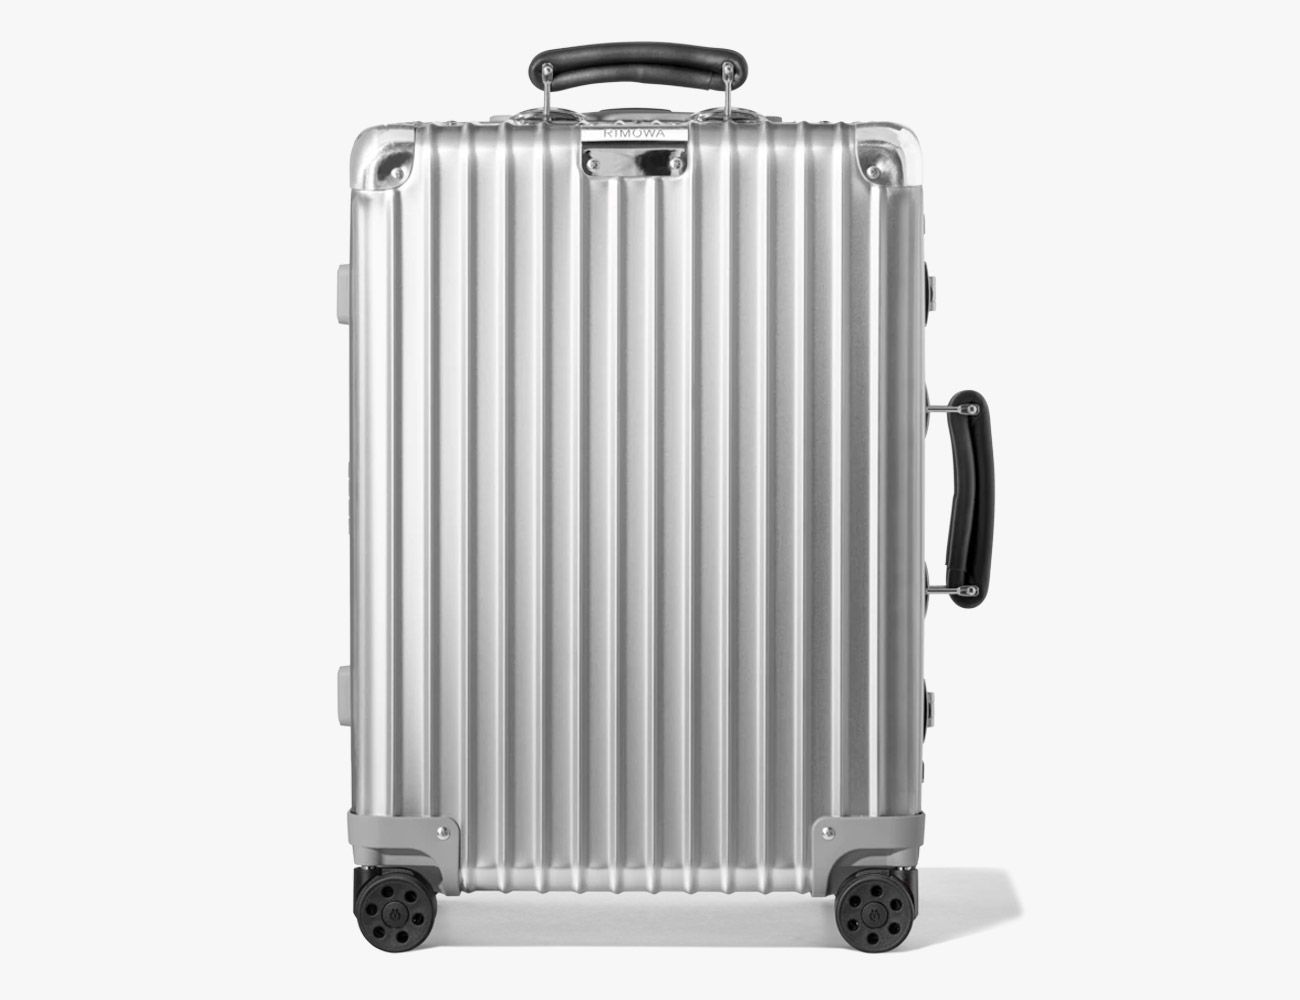 Rimowa Original Cabin Carry-On Review: Why This Expensive Suitcase Is ...